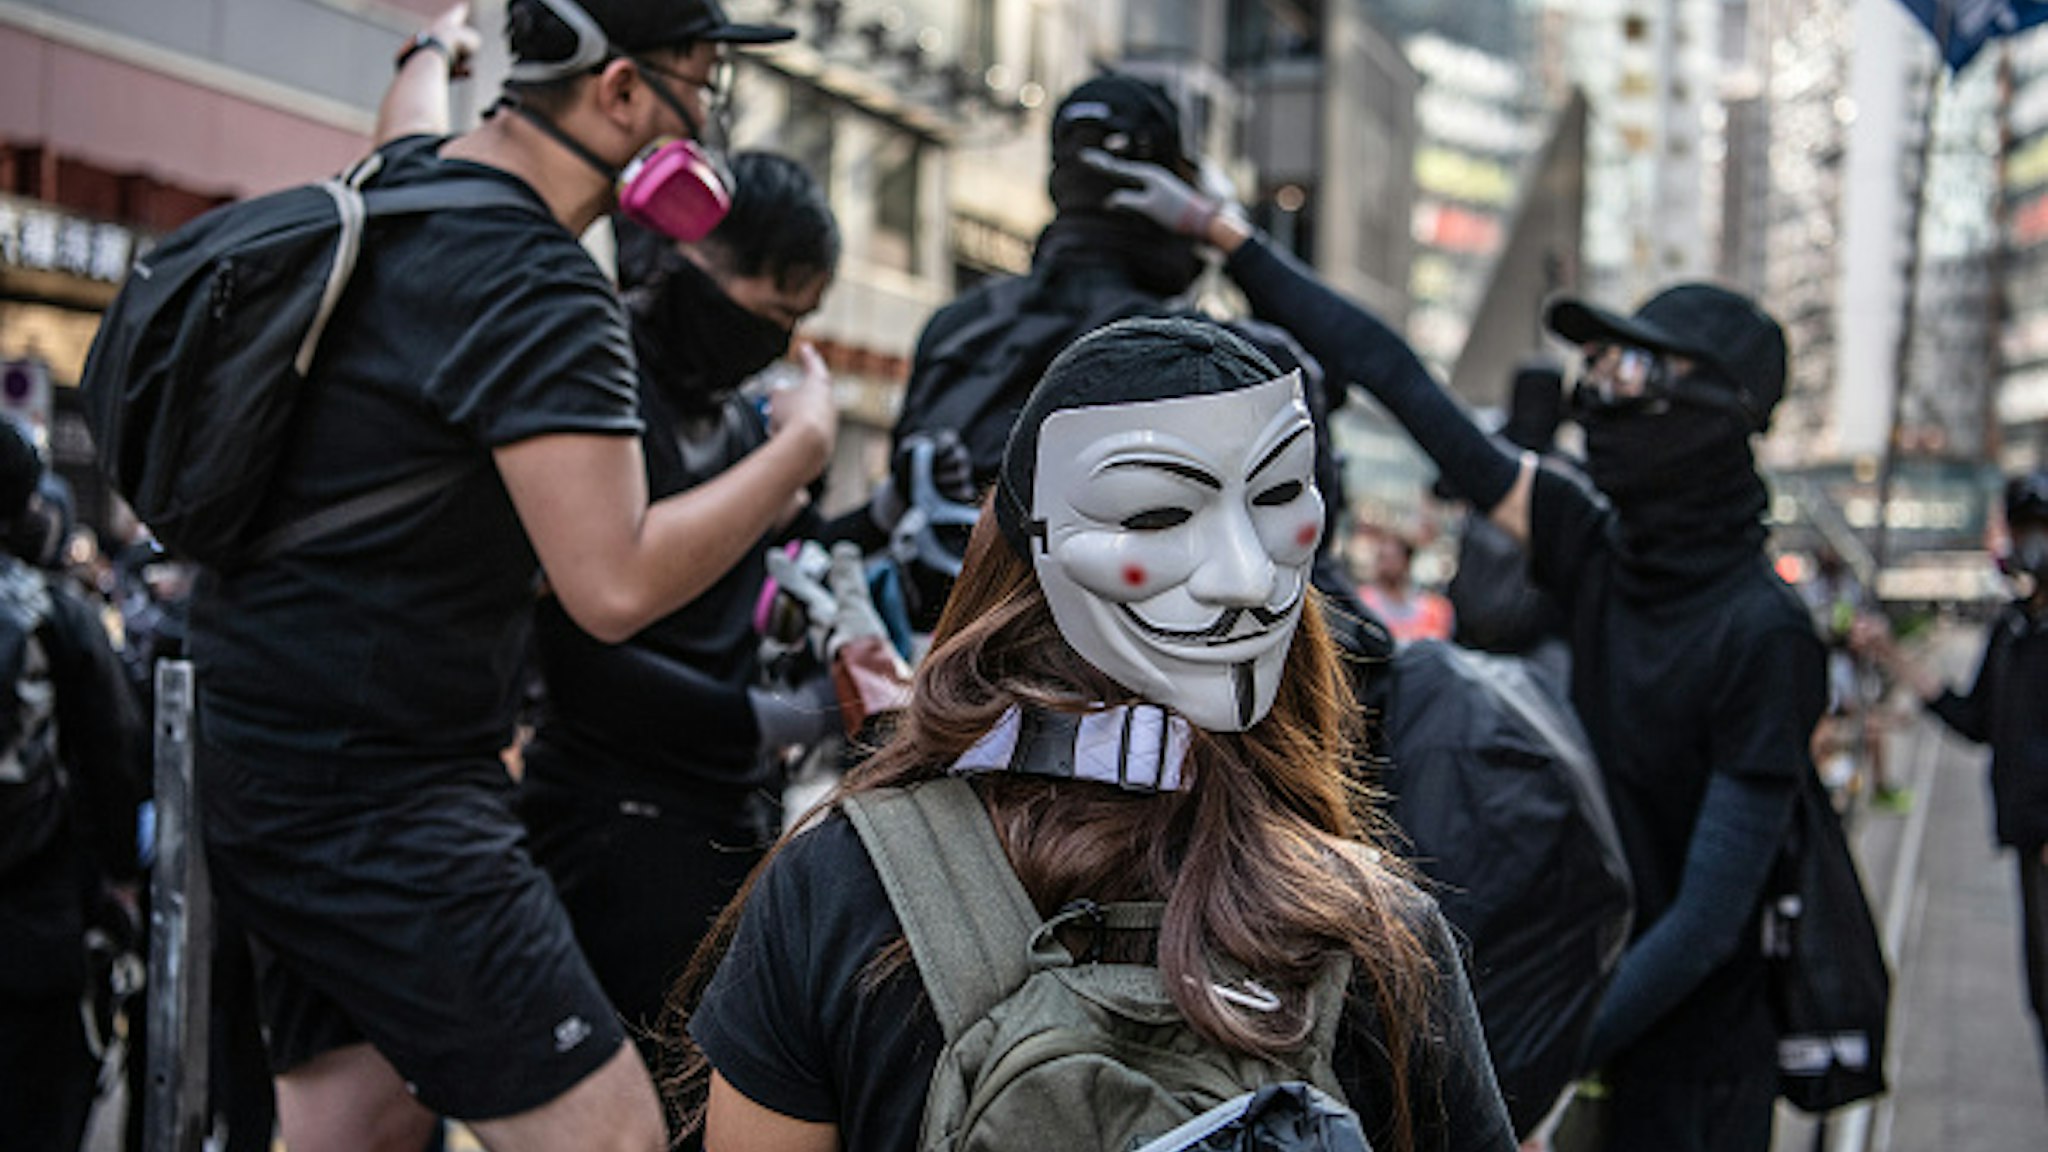 A demonstrator wears an anonymous masks, also known as Guy Fawkes masks, on the back of her head during a protest on Hennessy Road in the Causeway Bay district of Hong Kong, China, on Saturday, Nov. 2, 2019. Hong Kong police fired multiple rounds of tear gas at protesters who rallied for a 22nd consecutive weekend despite authorities denying them a permit to gather.